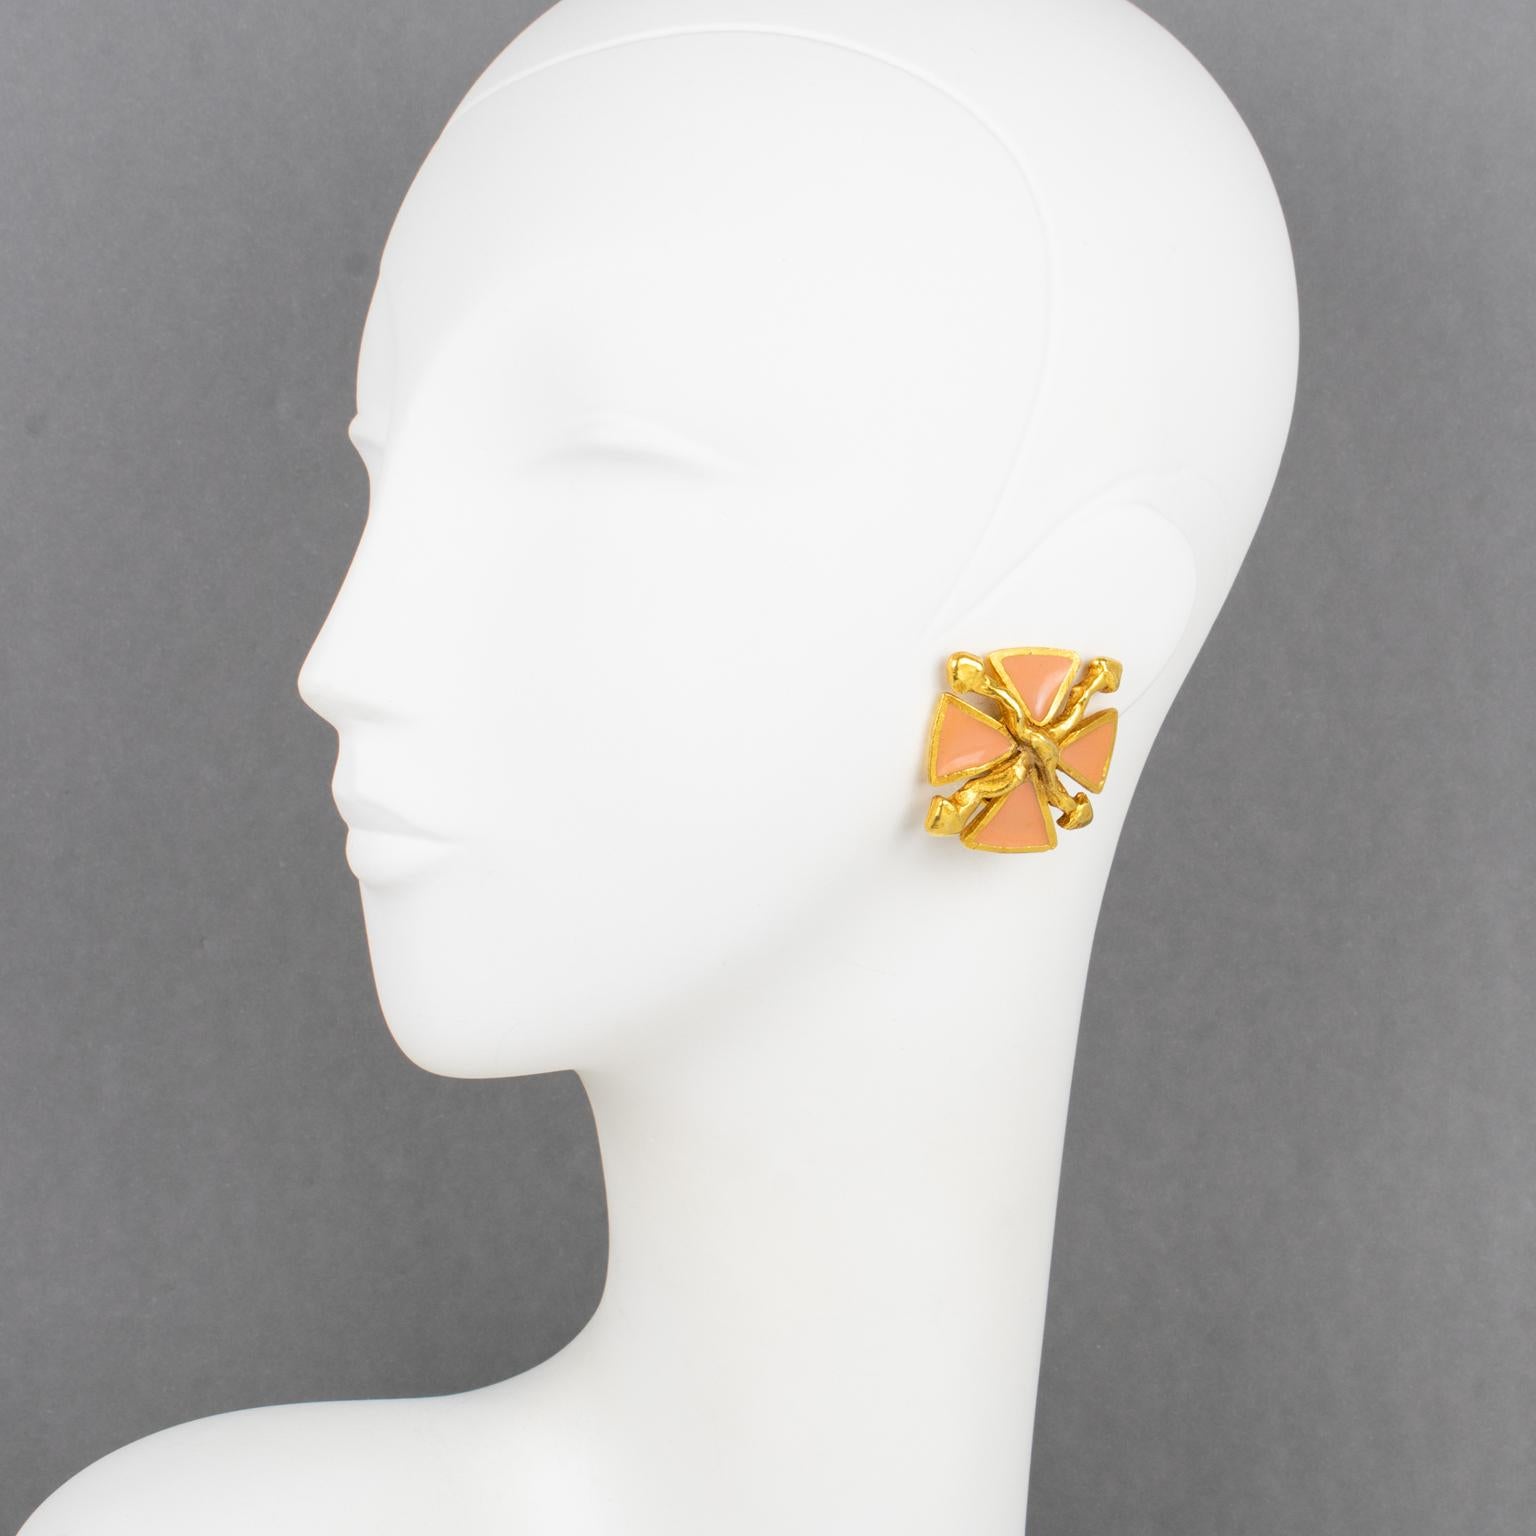 Antigona Paris designed those lovely clip-on earrings in the 1980s. The pieces boast a stylized Maltese cross design with gilt metal framing embellished with pink salmon enamel. Antigona Paris' hallmark is on the underside.
The earrings are in good